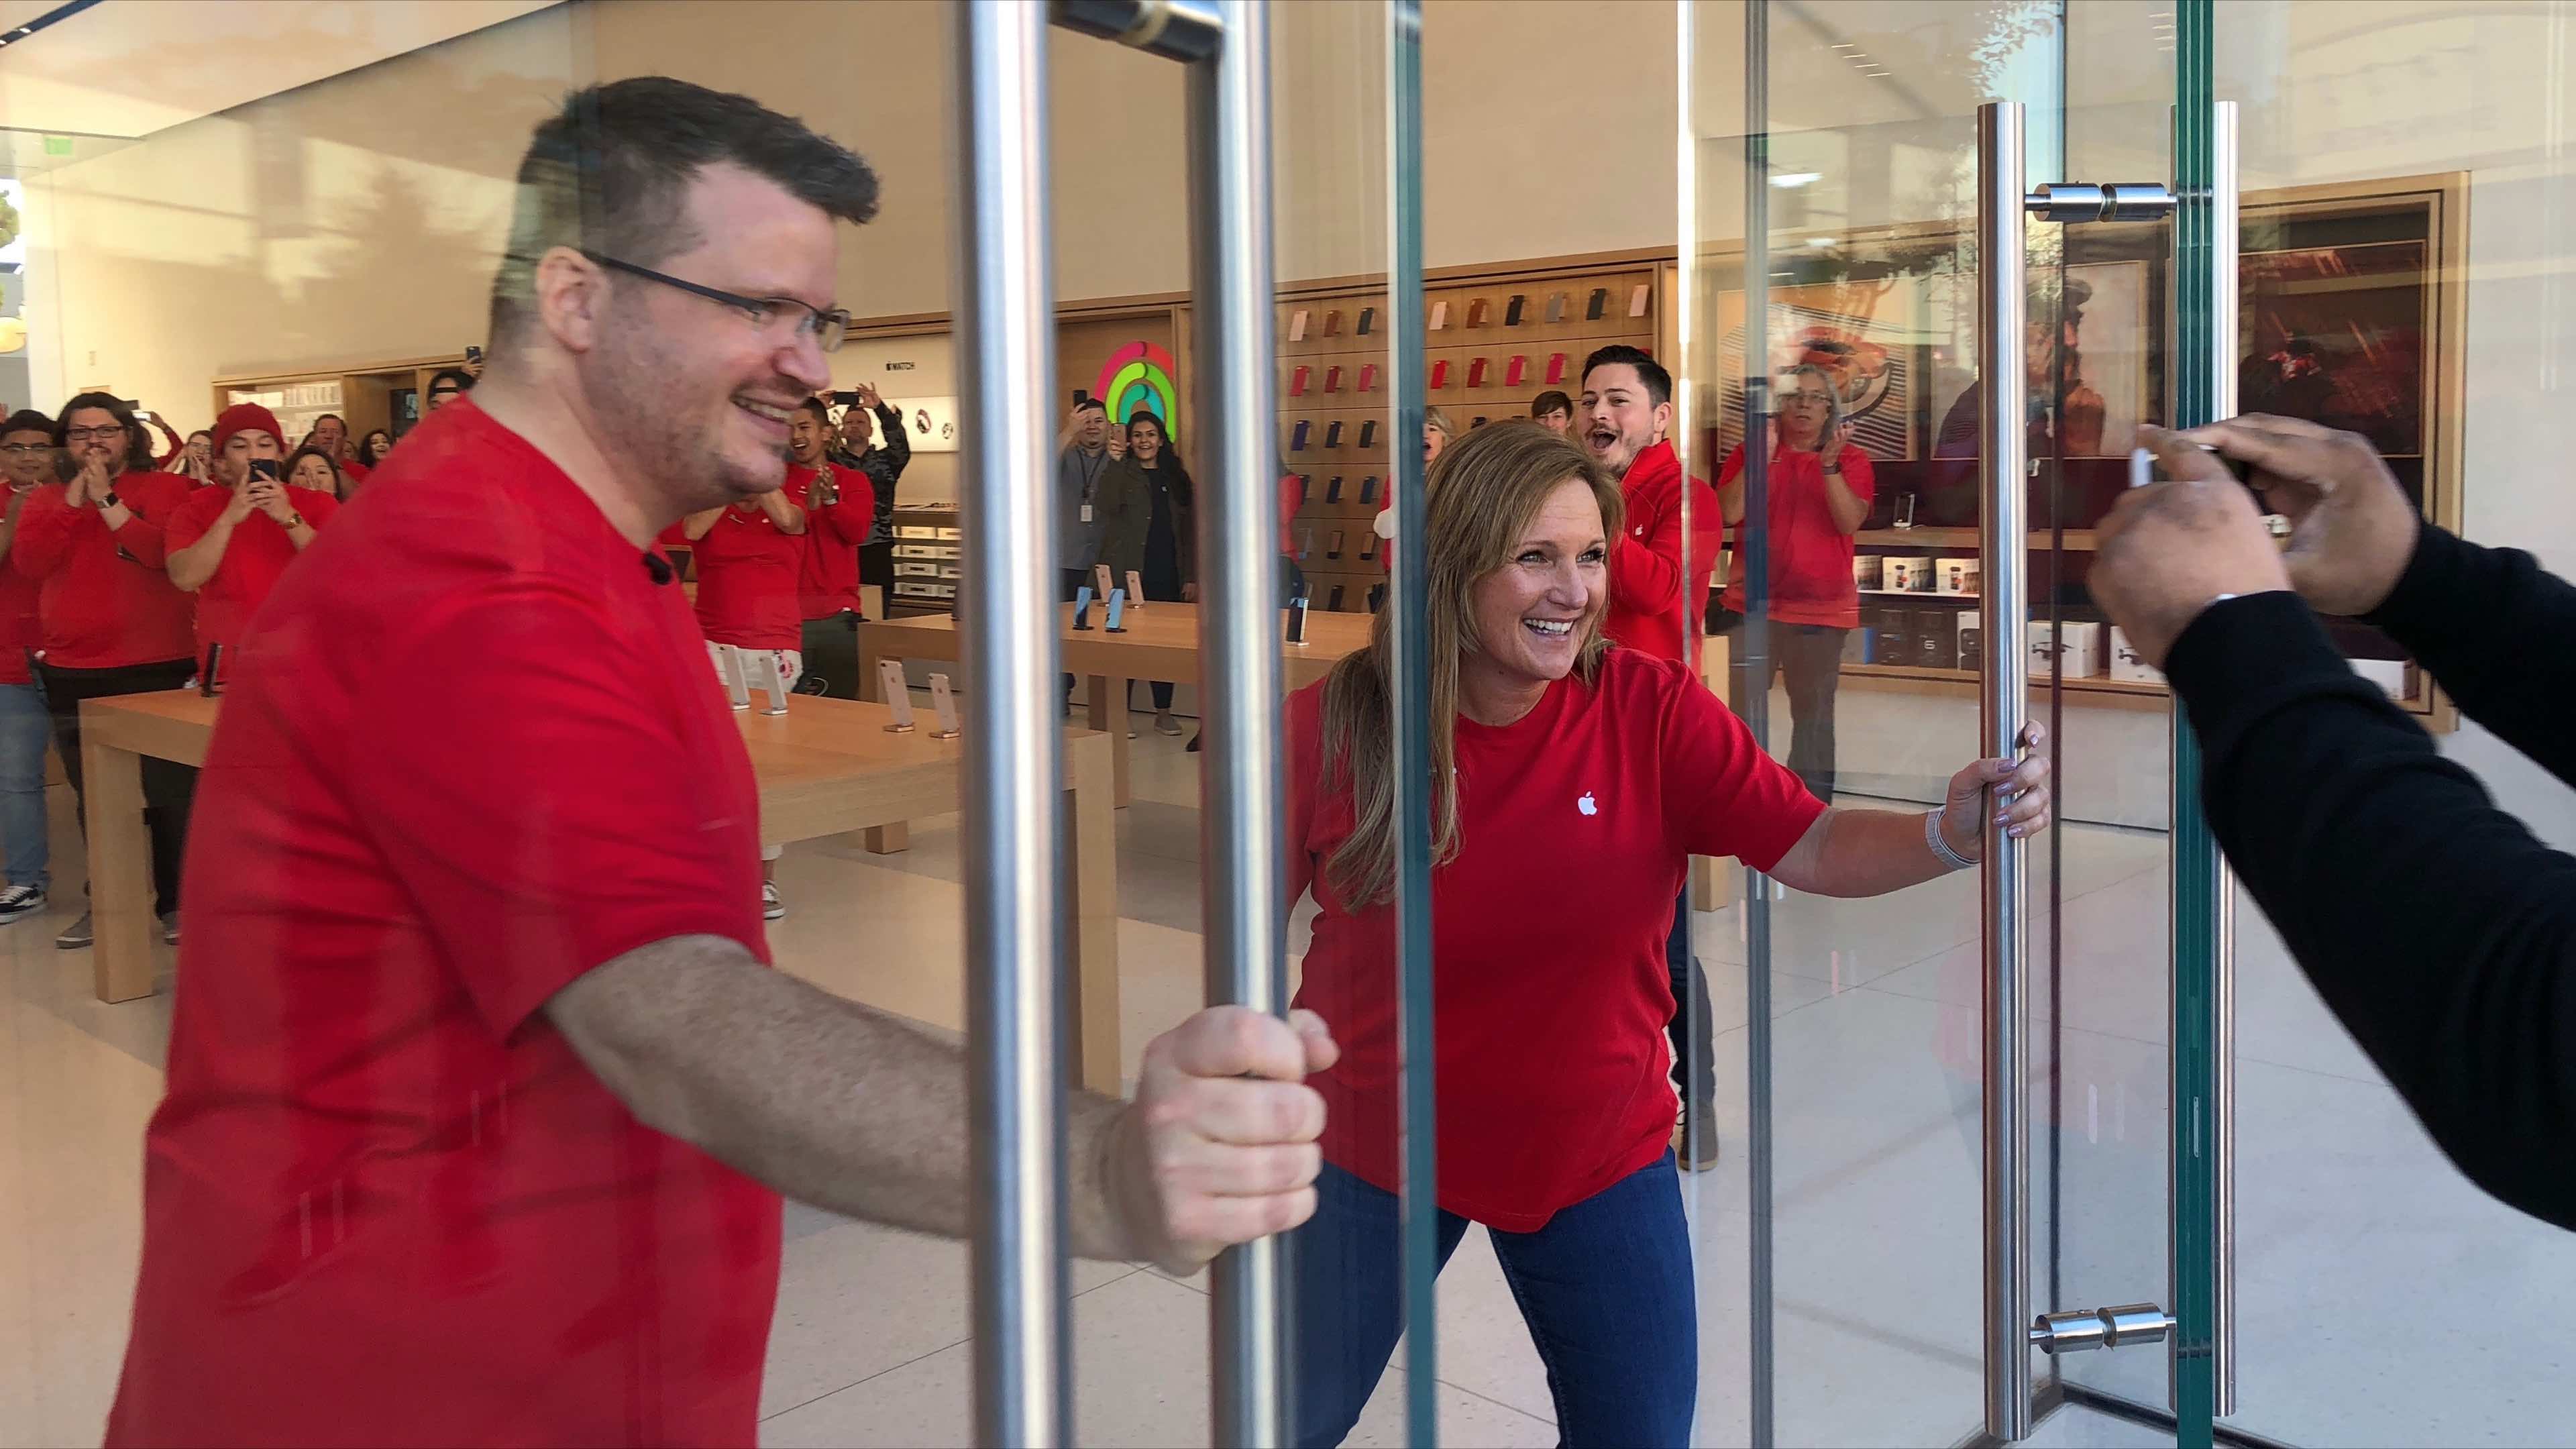 A Photo Tour of Apple's New Flagship Chicago Store - MacStories